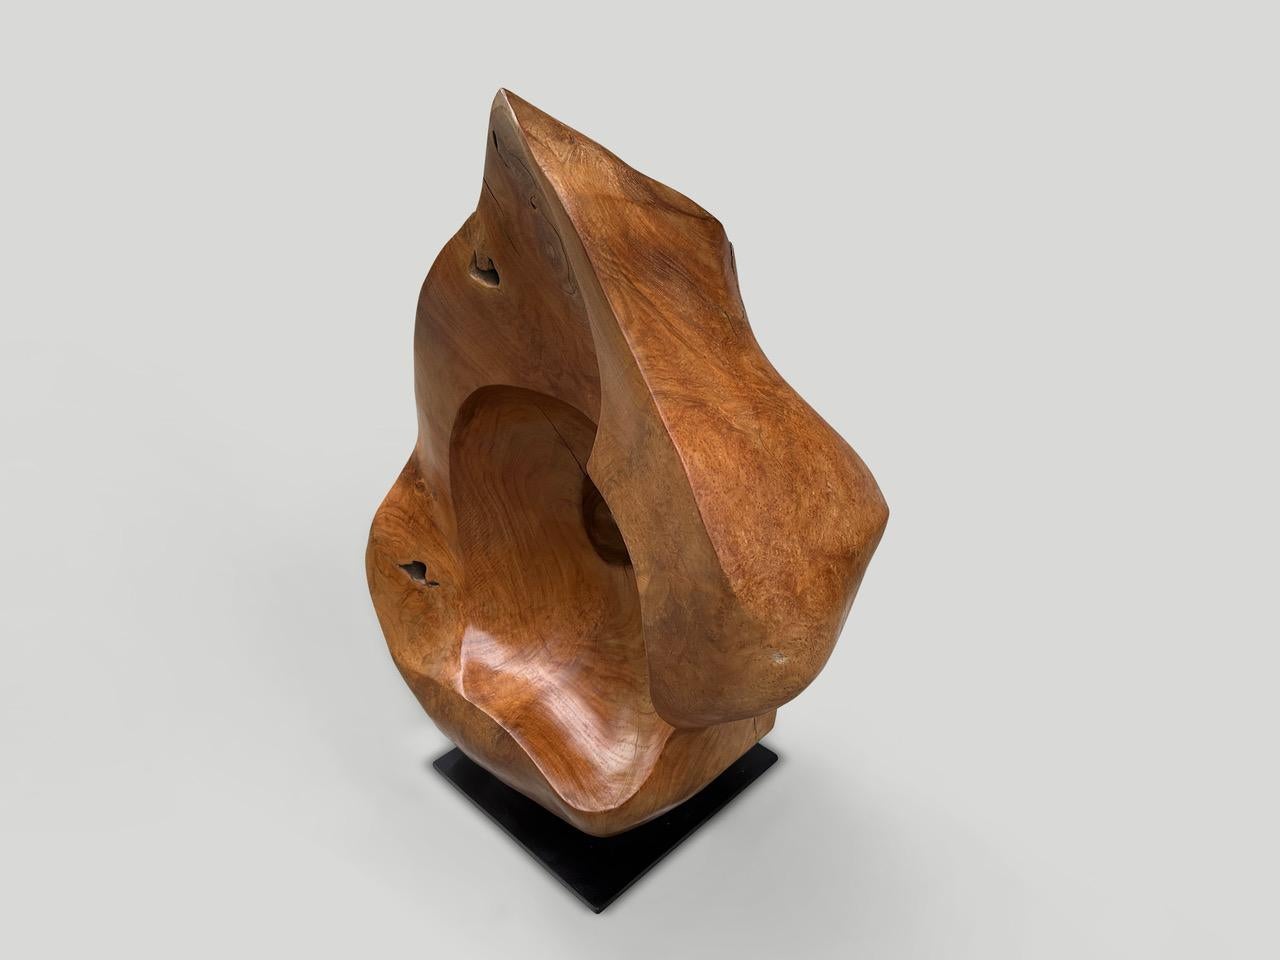 Minimalist sculpture hand carved from a single block of century old teak wood. Finished with a natural oil revealing the beautiful wood grain. Set on a modern black metal stand 12” x 12″

Own an Andrianna Shamaris original.

Andrianna Shamaris. The